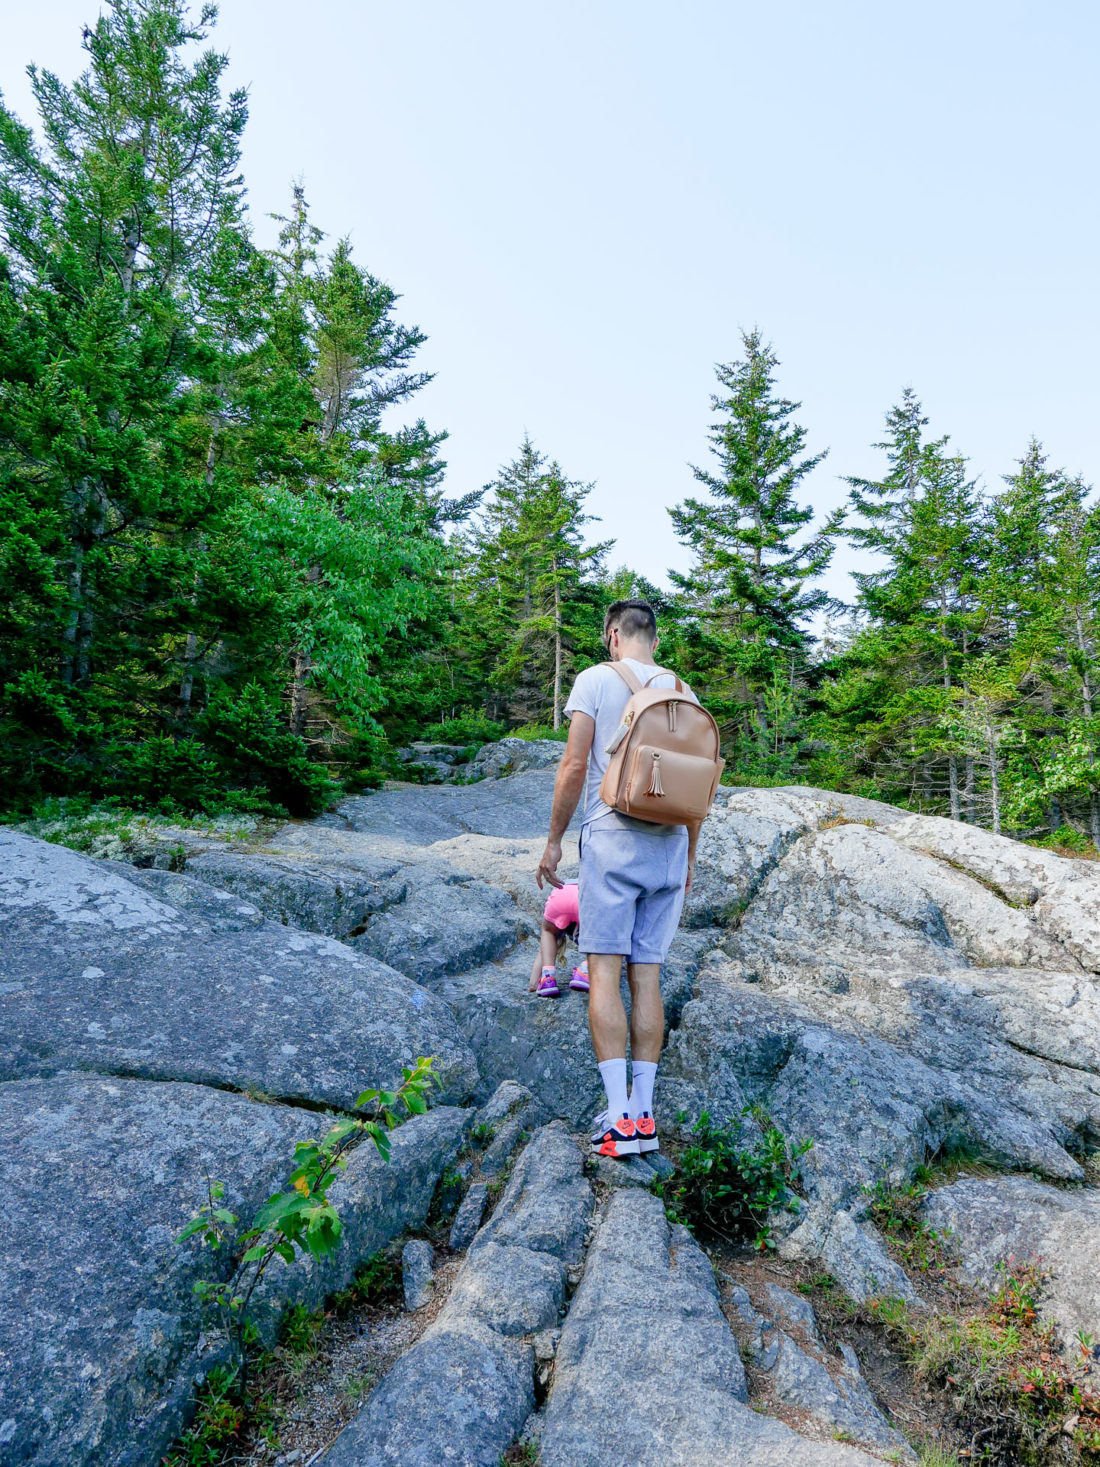 Kyle Martino hikes with two year old daughter Marlowe on a trail in Acadia National Park